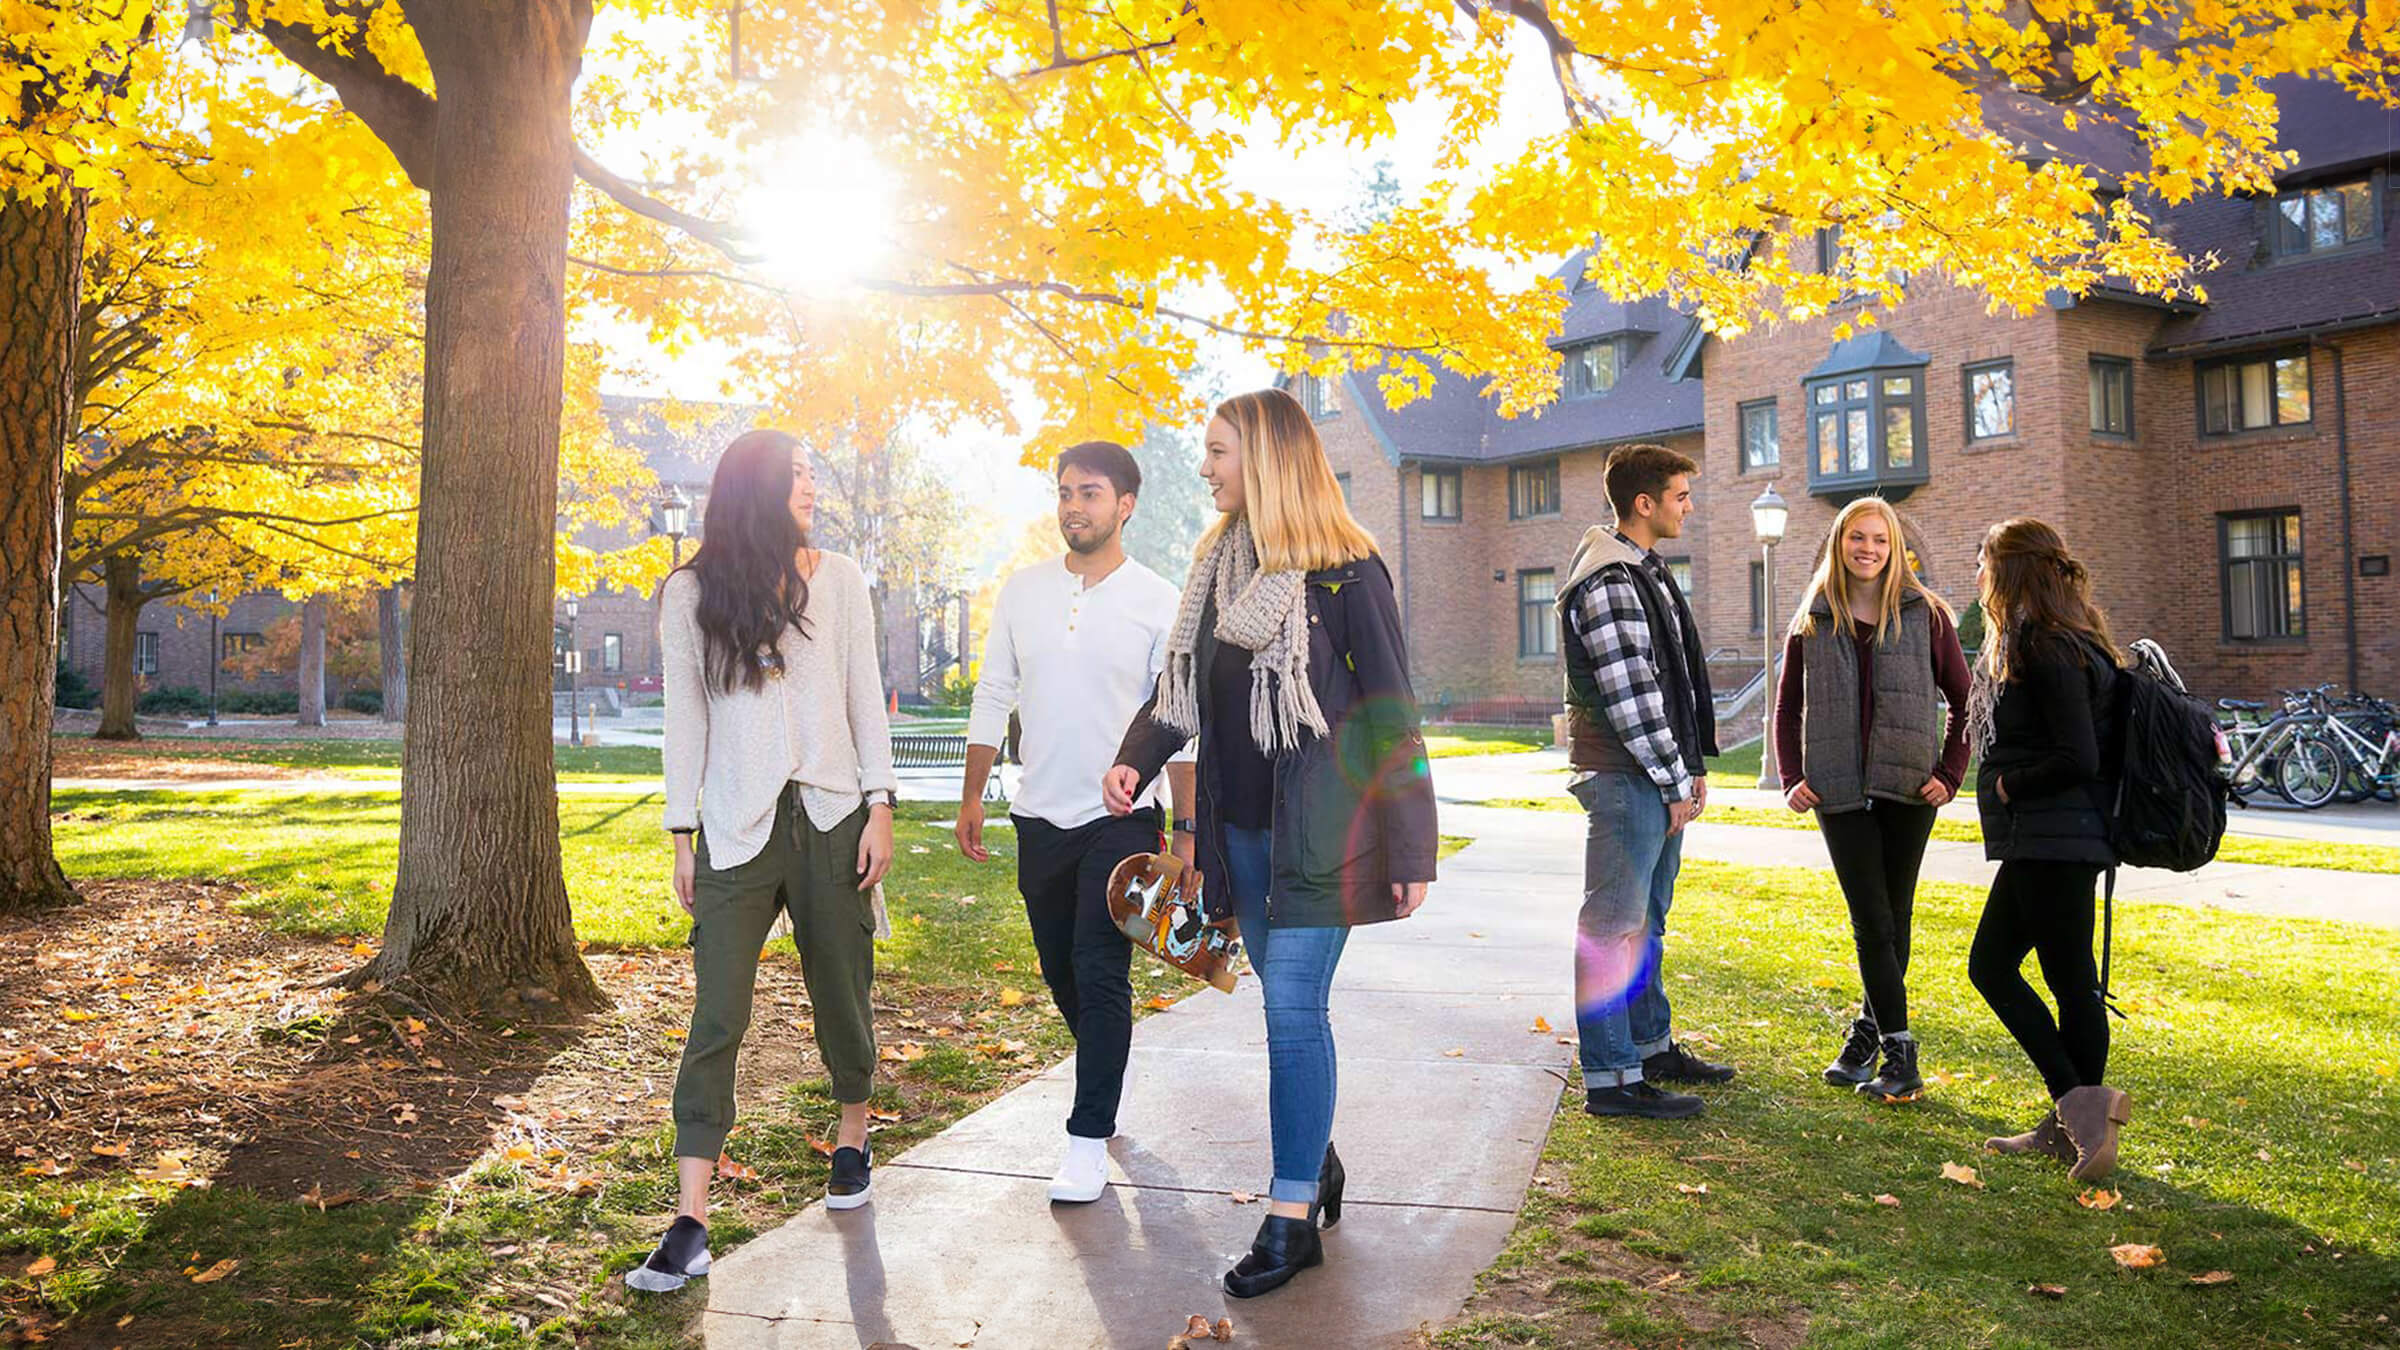 One group of three students walks down a campus path while another group stands, conversing.